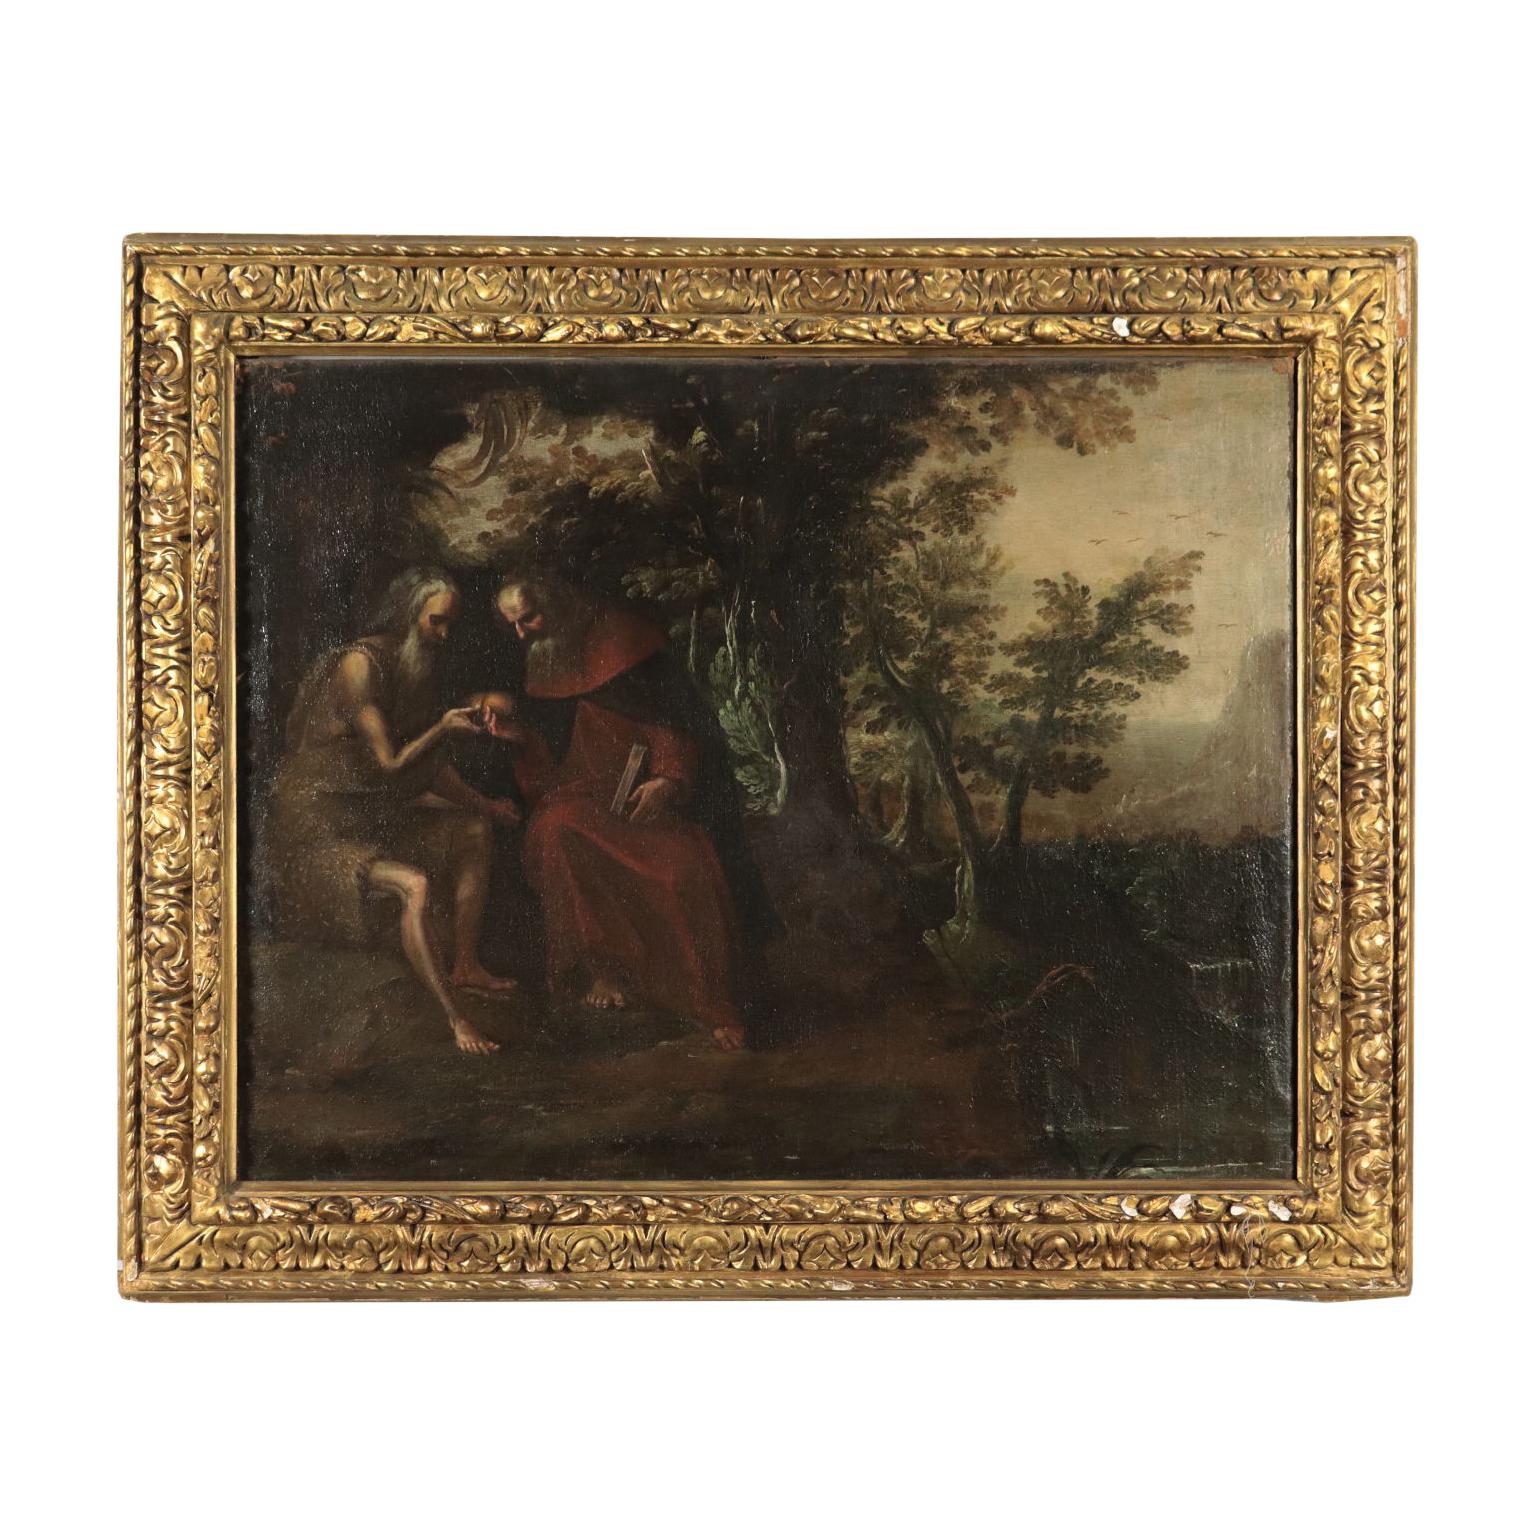 Unknown Figurative Painting - Saint Paul Hermit And Saint Anthony Abbot Oil On Canvas 17th Century